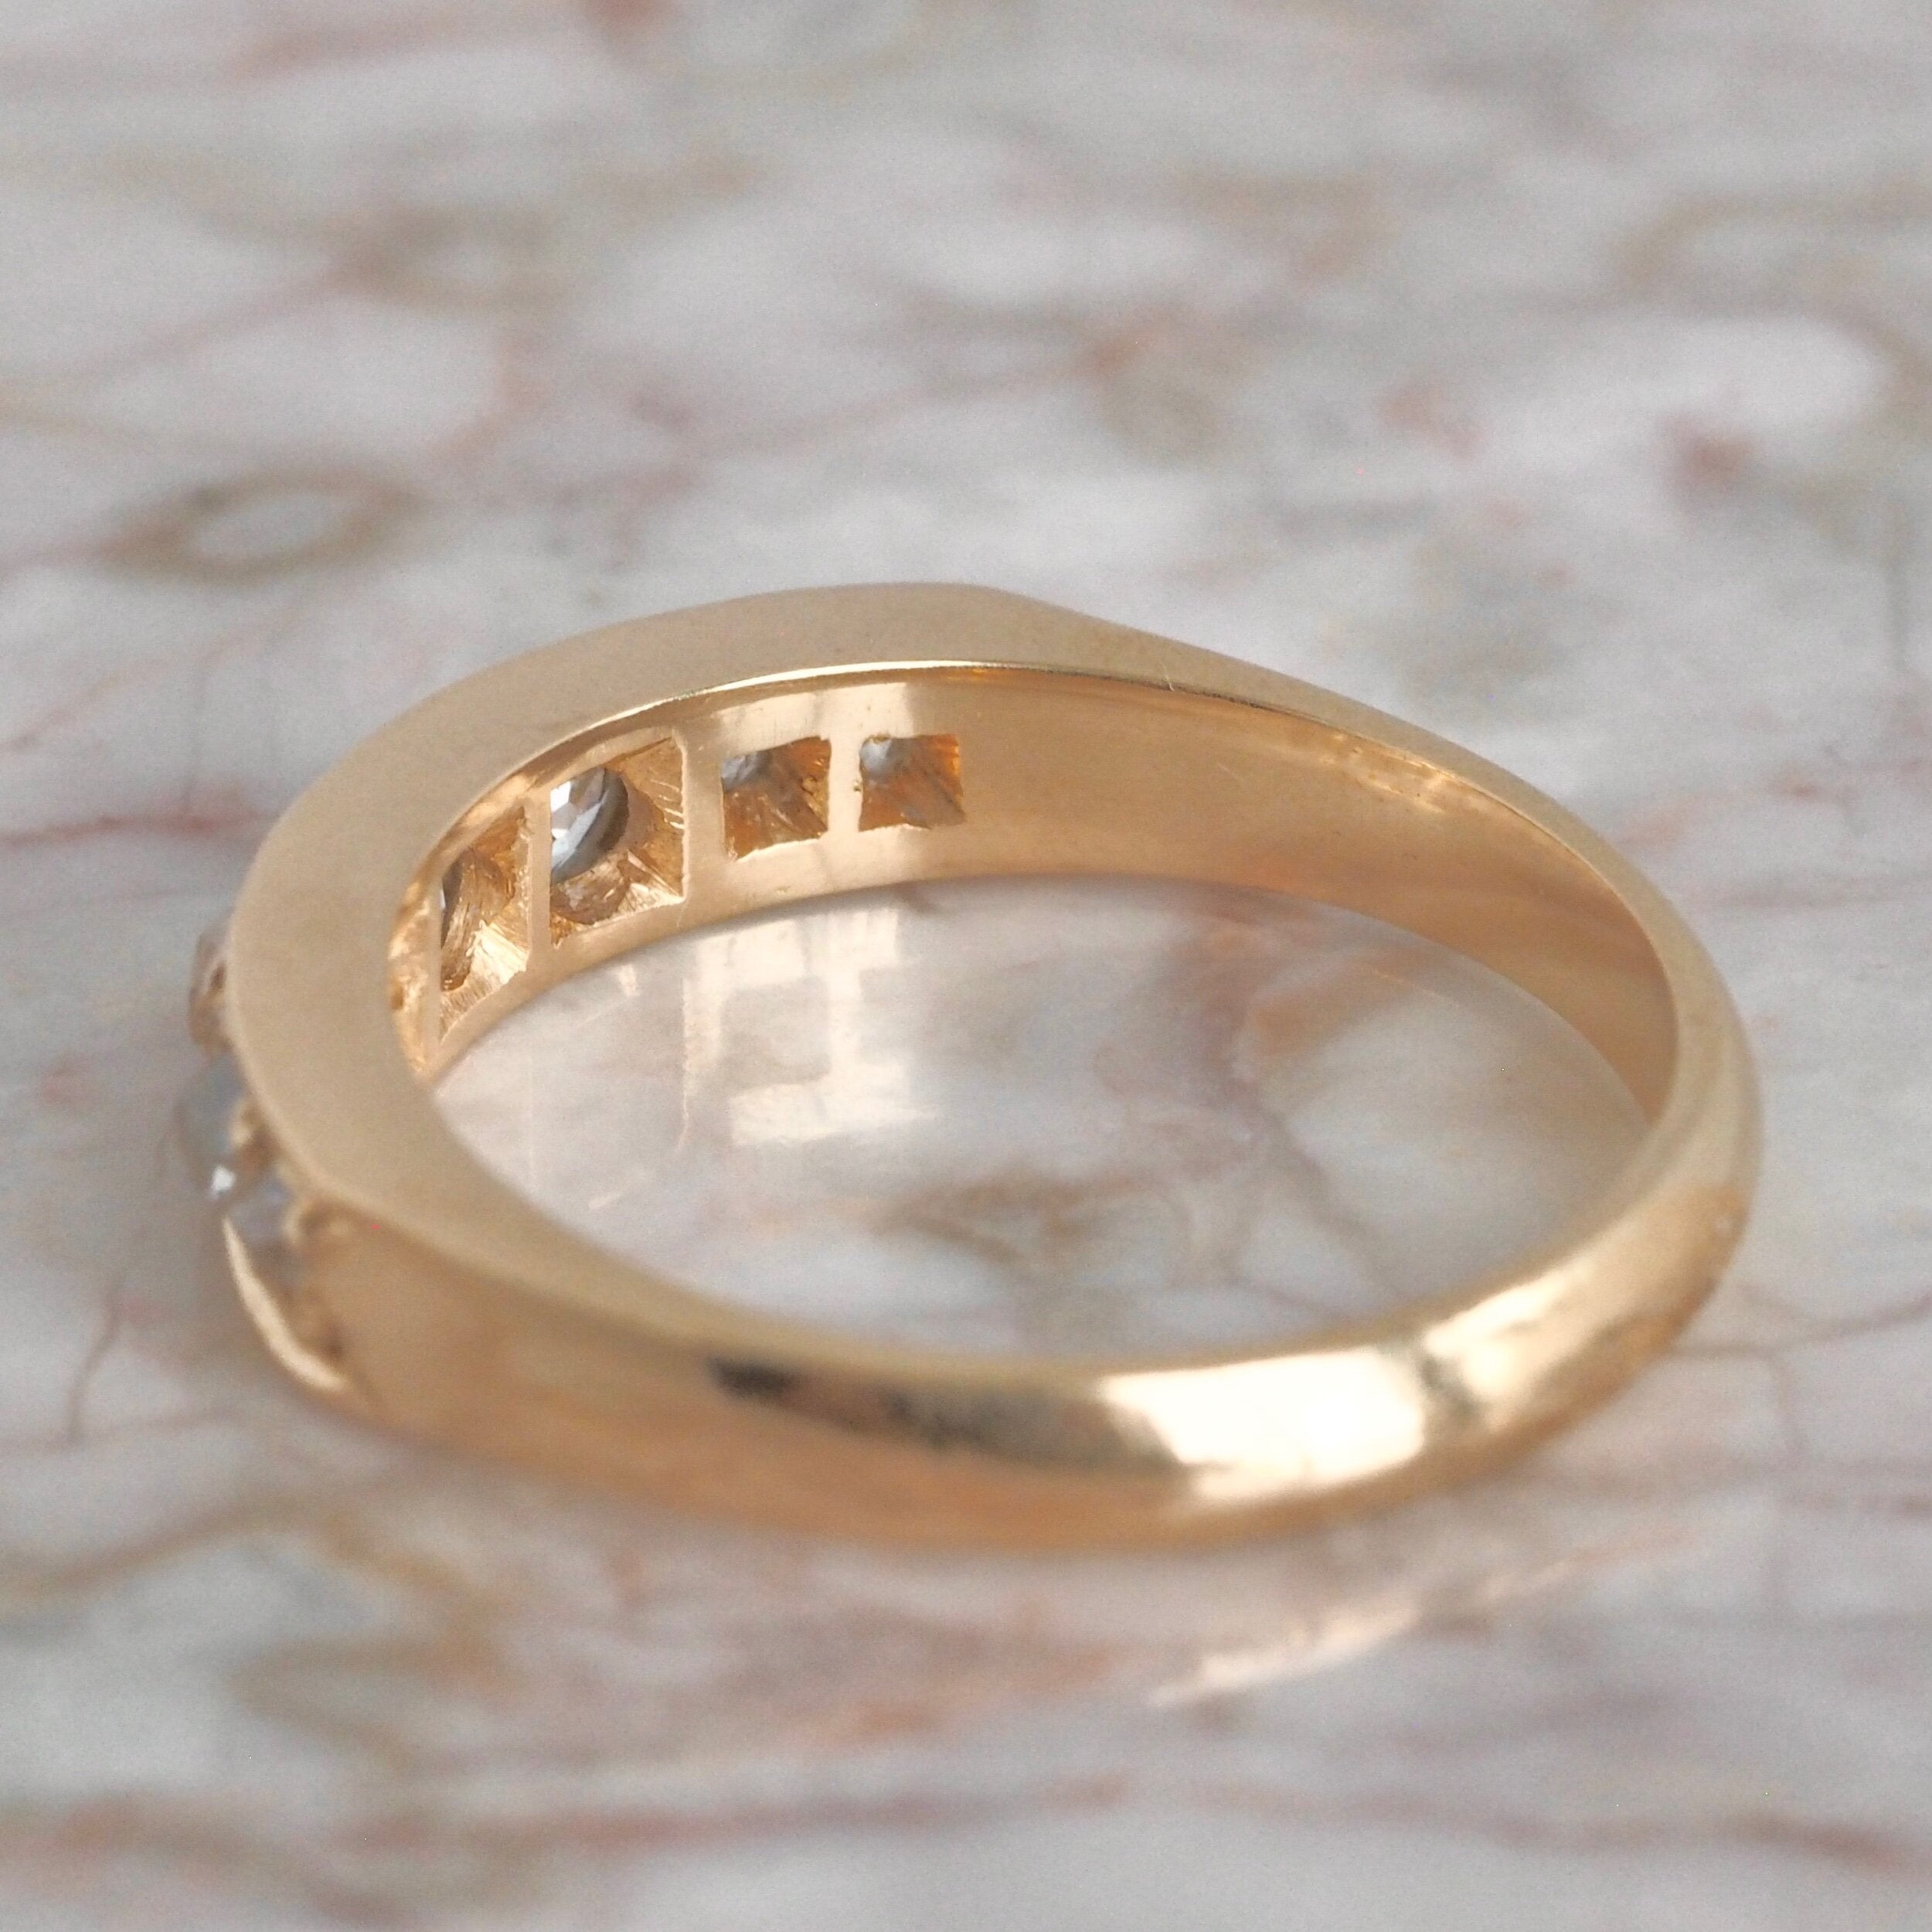 Antique French 18k Gold Old Mine Cut Half Hoop Diamond Ring